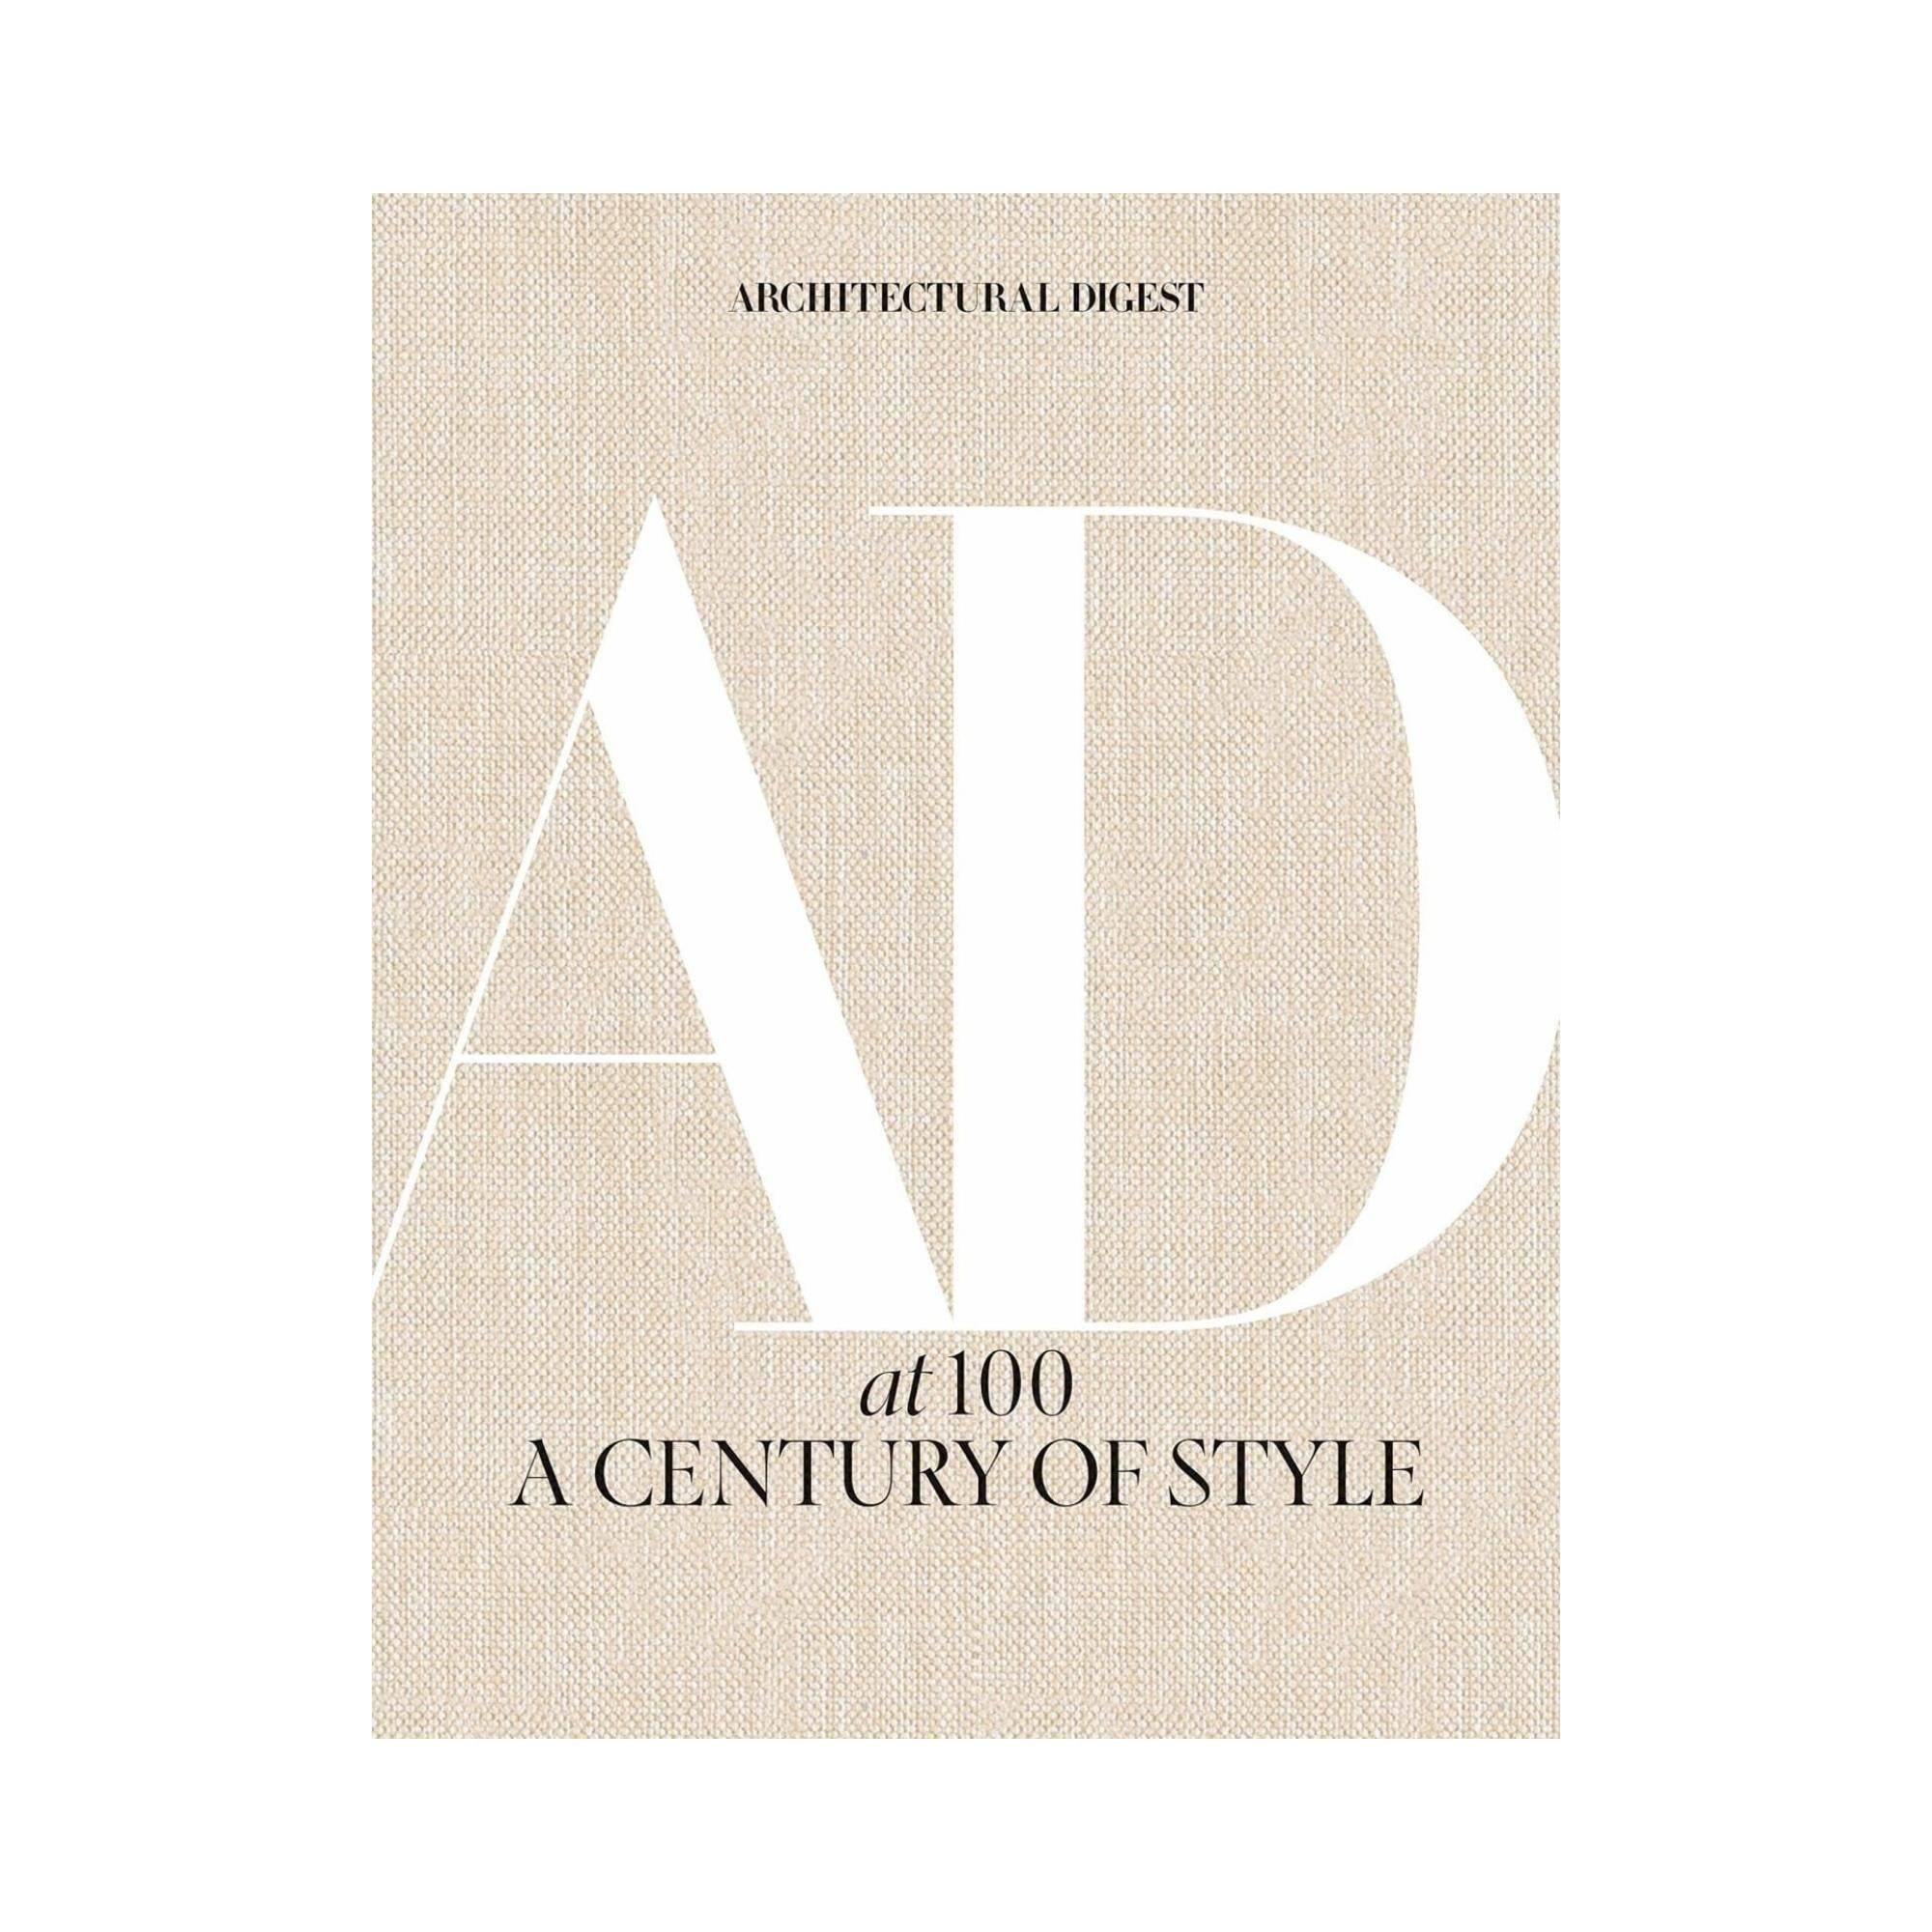 Architectural Digest at 100: A Century of Style - THAT COOL LIVING